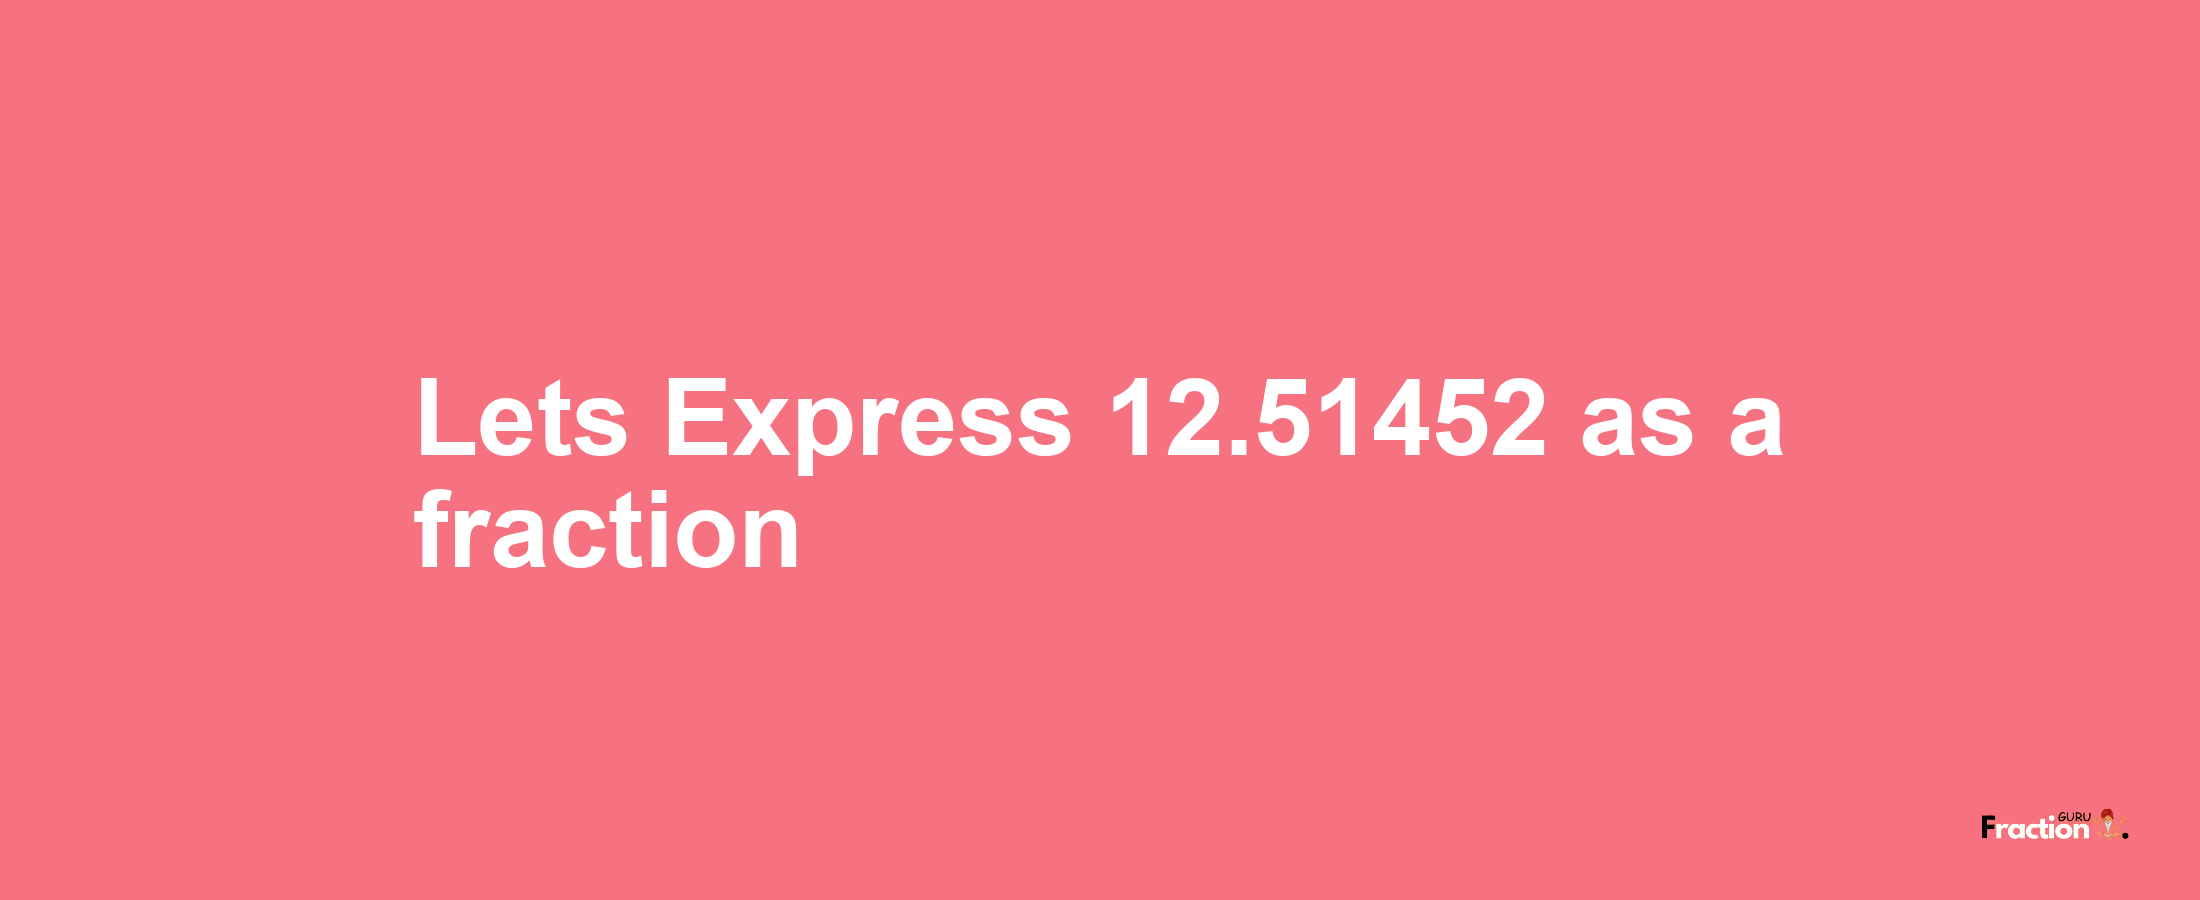 Lets Express 12.51452 as afraction